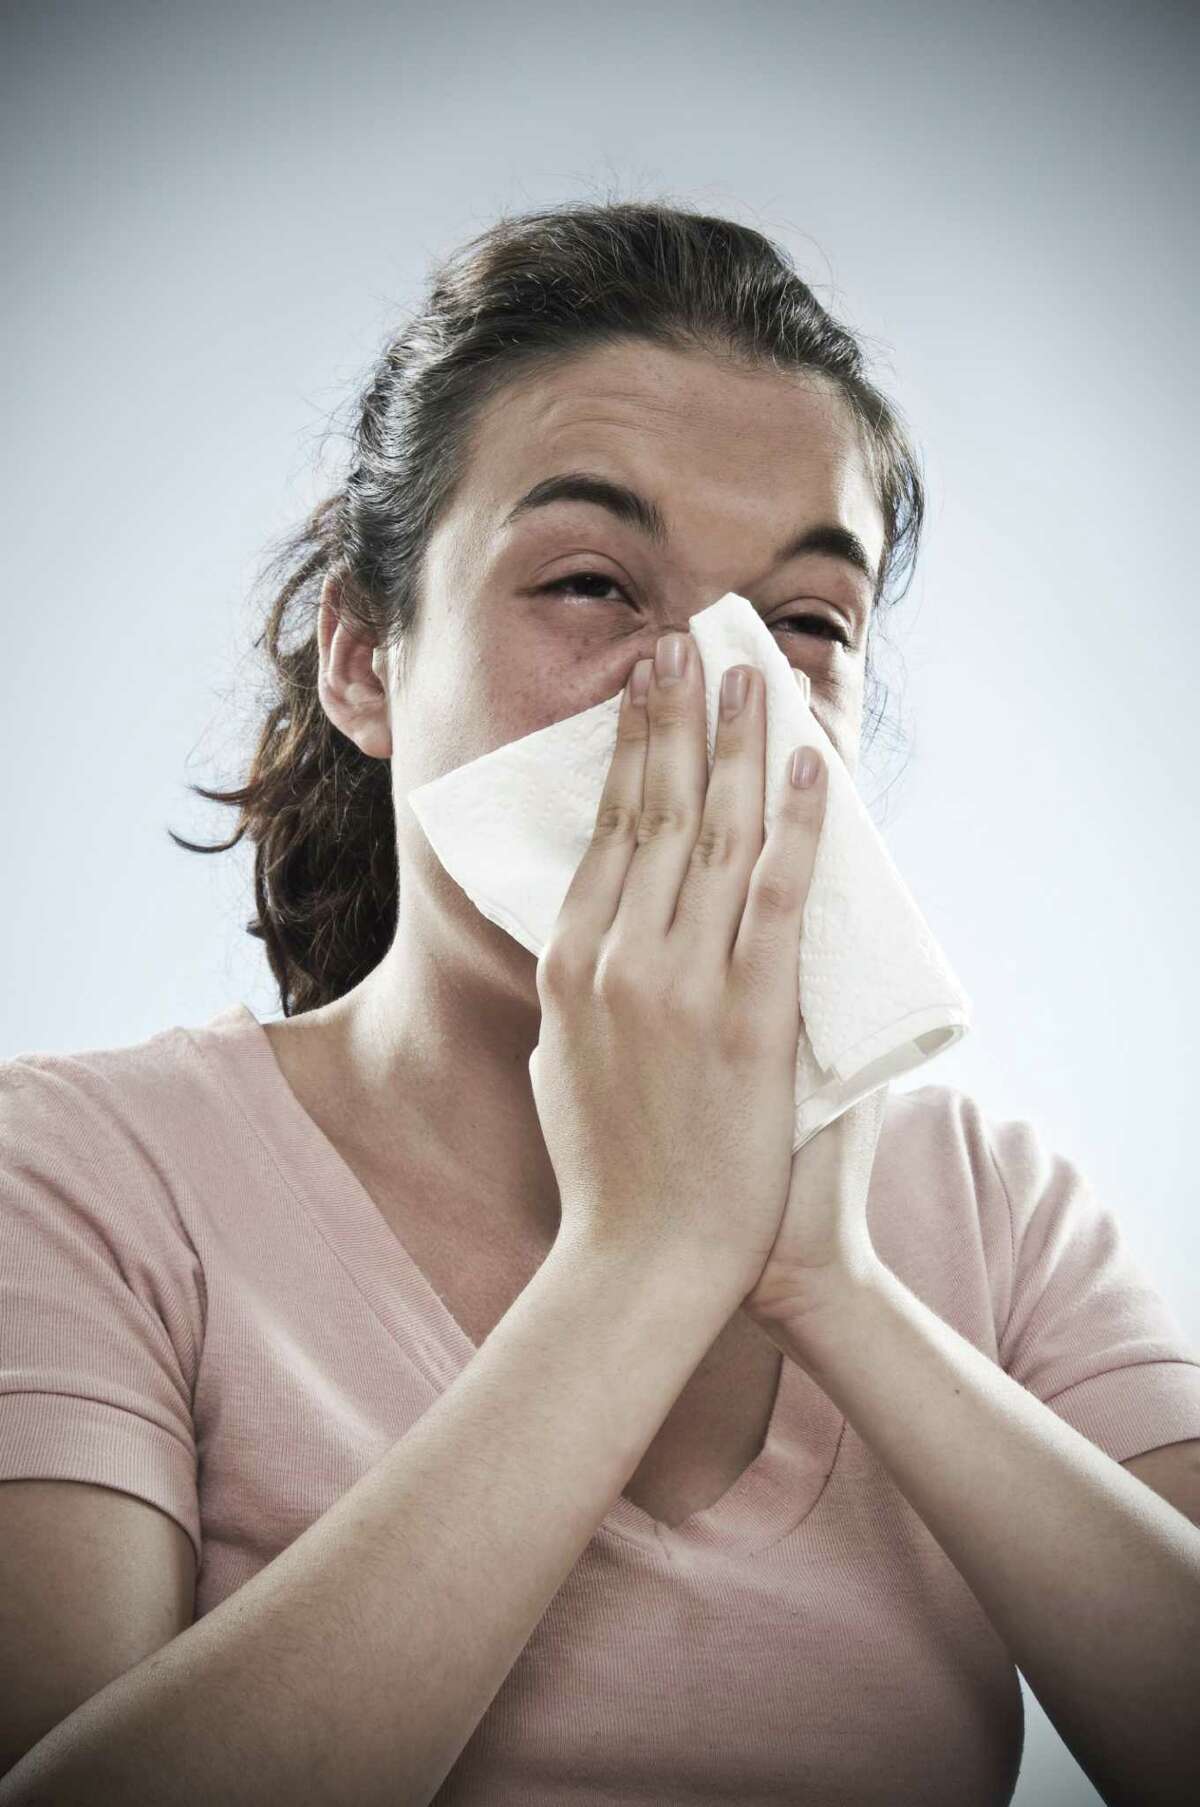 In most of the country, allergy season lasts from spring through spring and fall. In San Antonio, thanks to cedar fever, it strikes in winter, too.